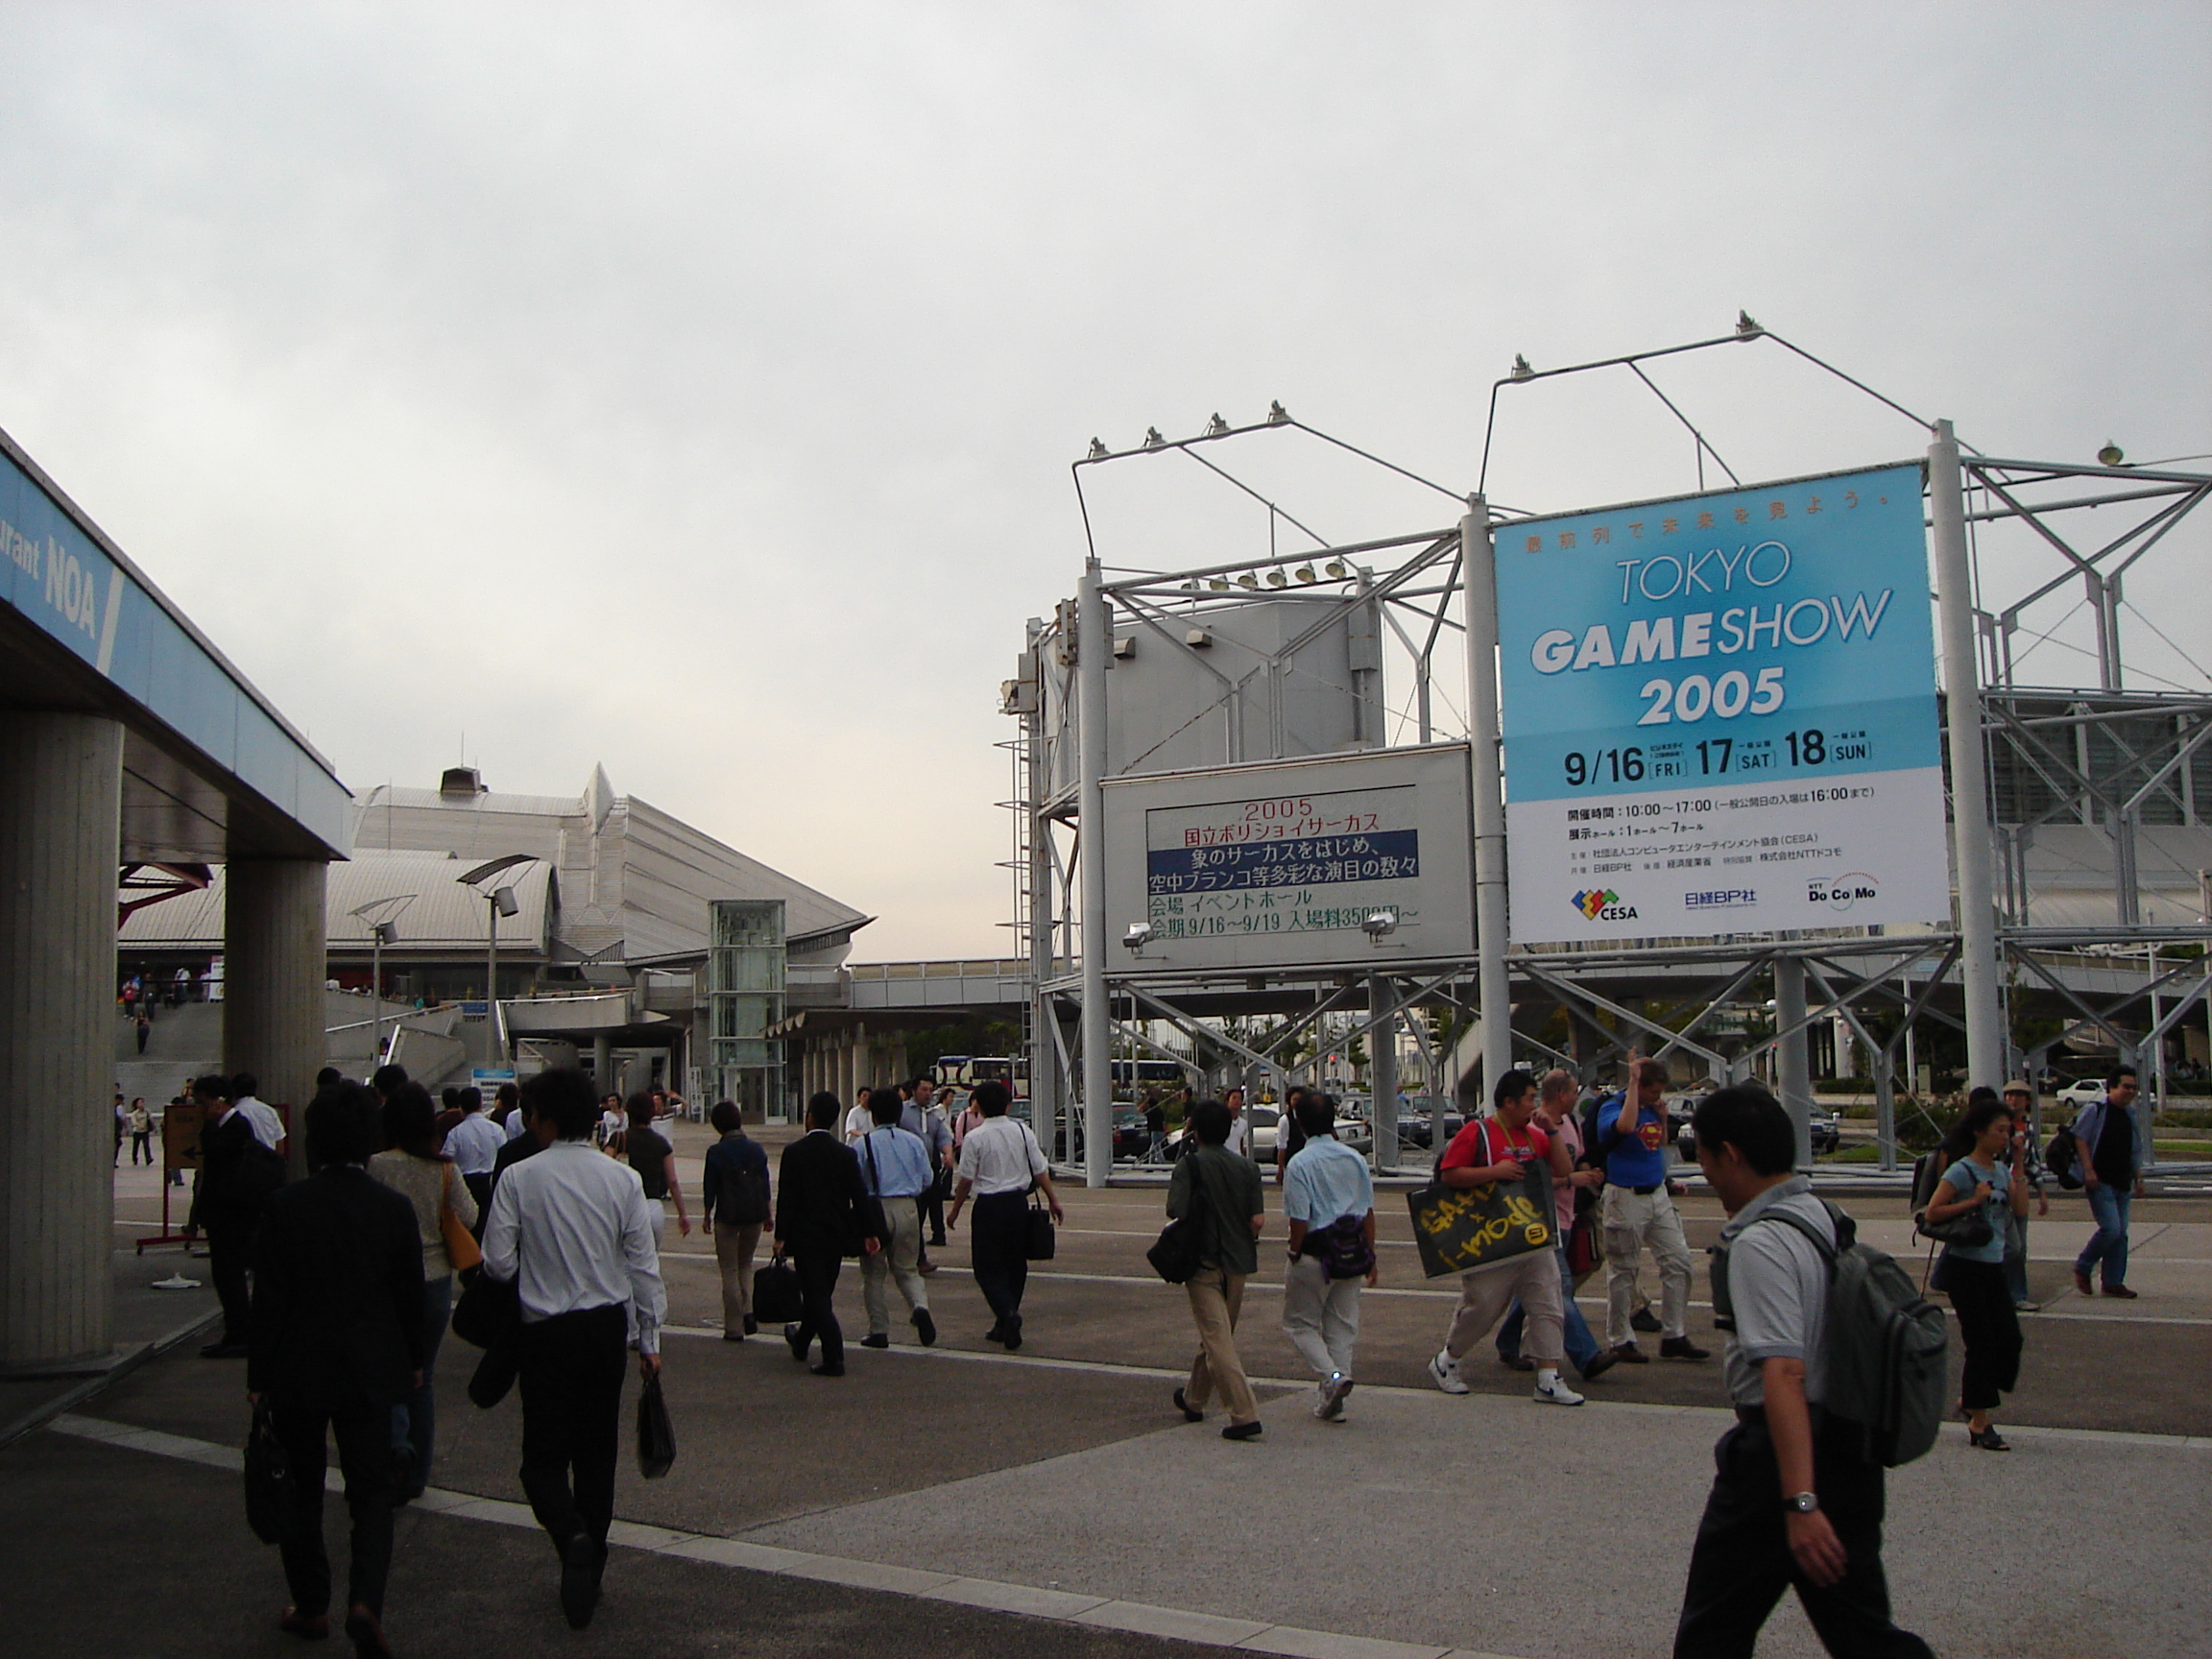 signs for tgs outside the venue